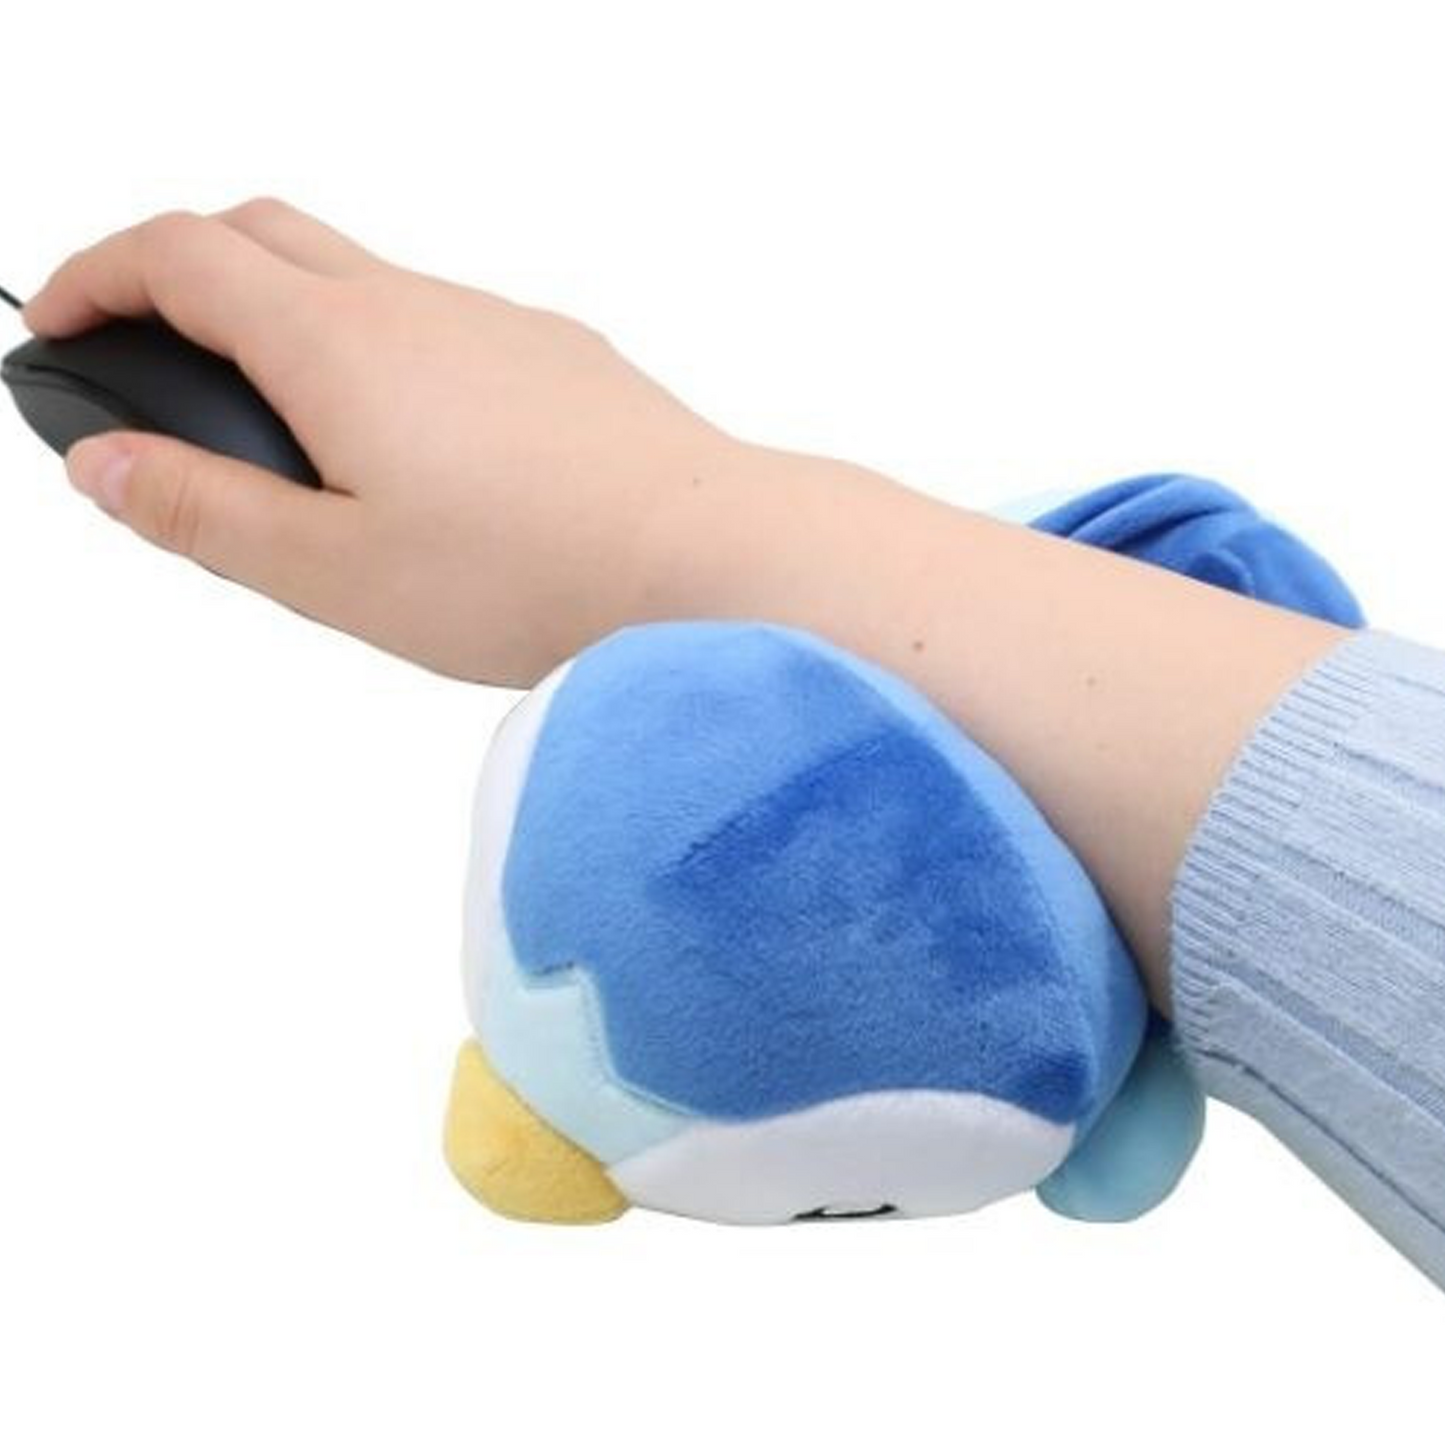 Piplup Arm Pillow - Japanese Pokémon Plushie Soft Toy (Being Used) | Happy Piranha